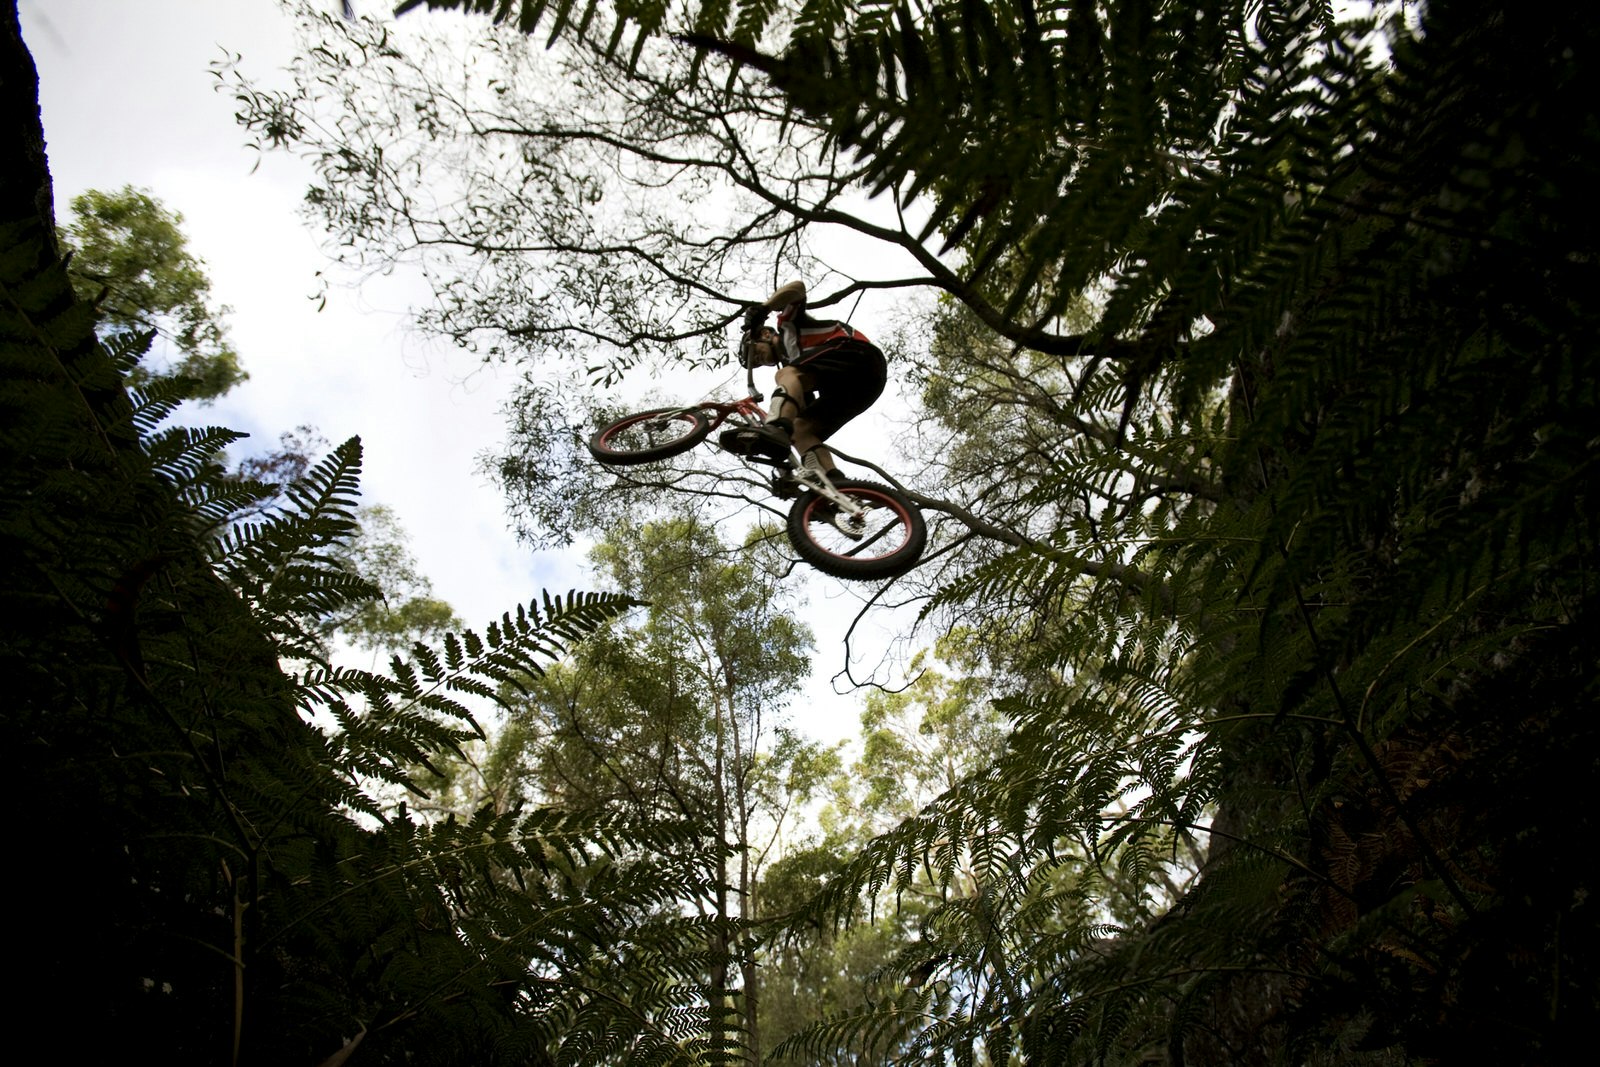 A mountain biker jumps flies over the camera while jumping a large gap at Toohey Forest, Brisbane; he's silhouetted against the sky, along with ferns and trees., Queensland, Australia